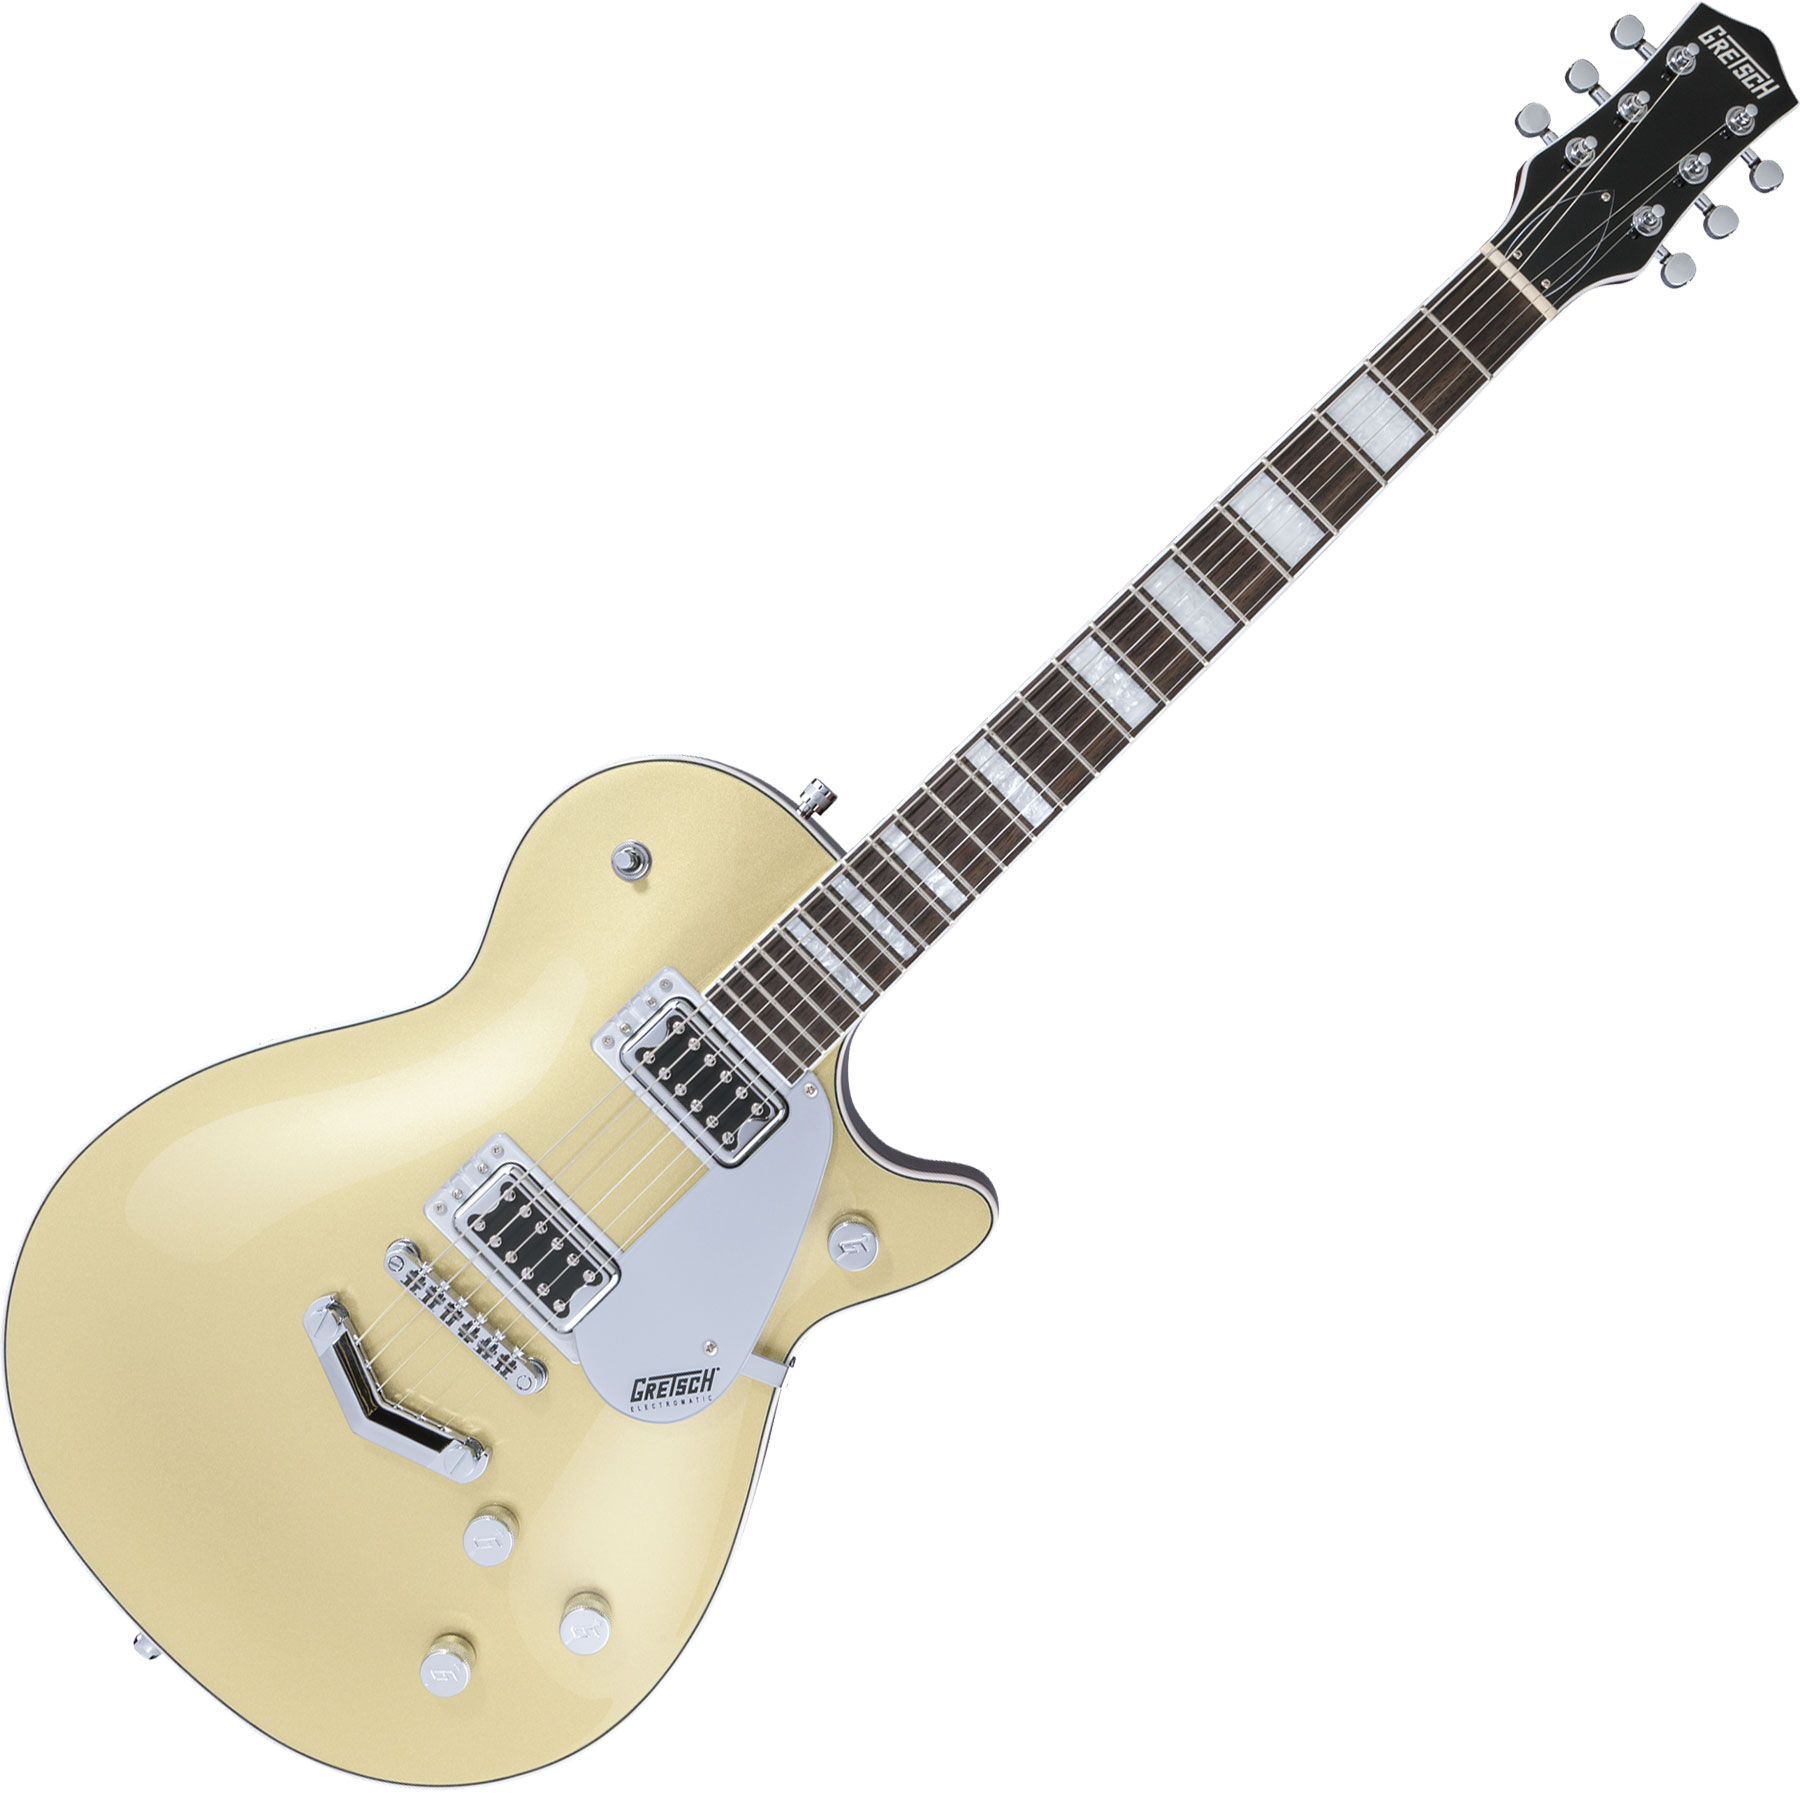 Gretsch G5220 Electromatic Jet BT V-Stoptail - casino gold Solid 